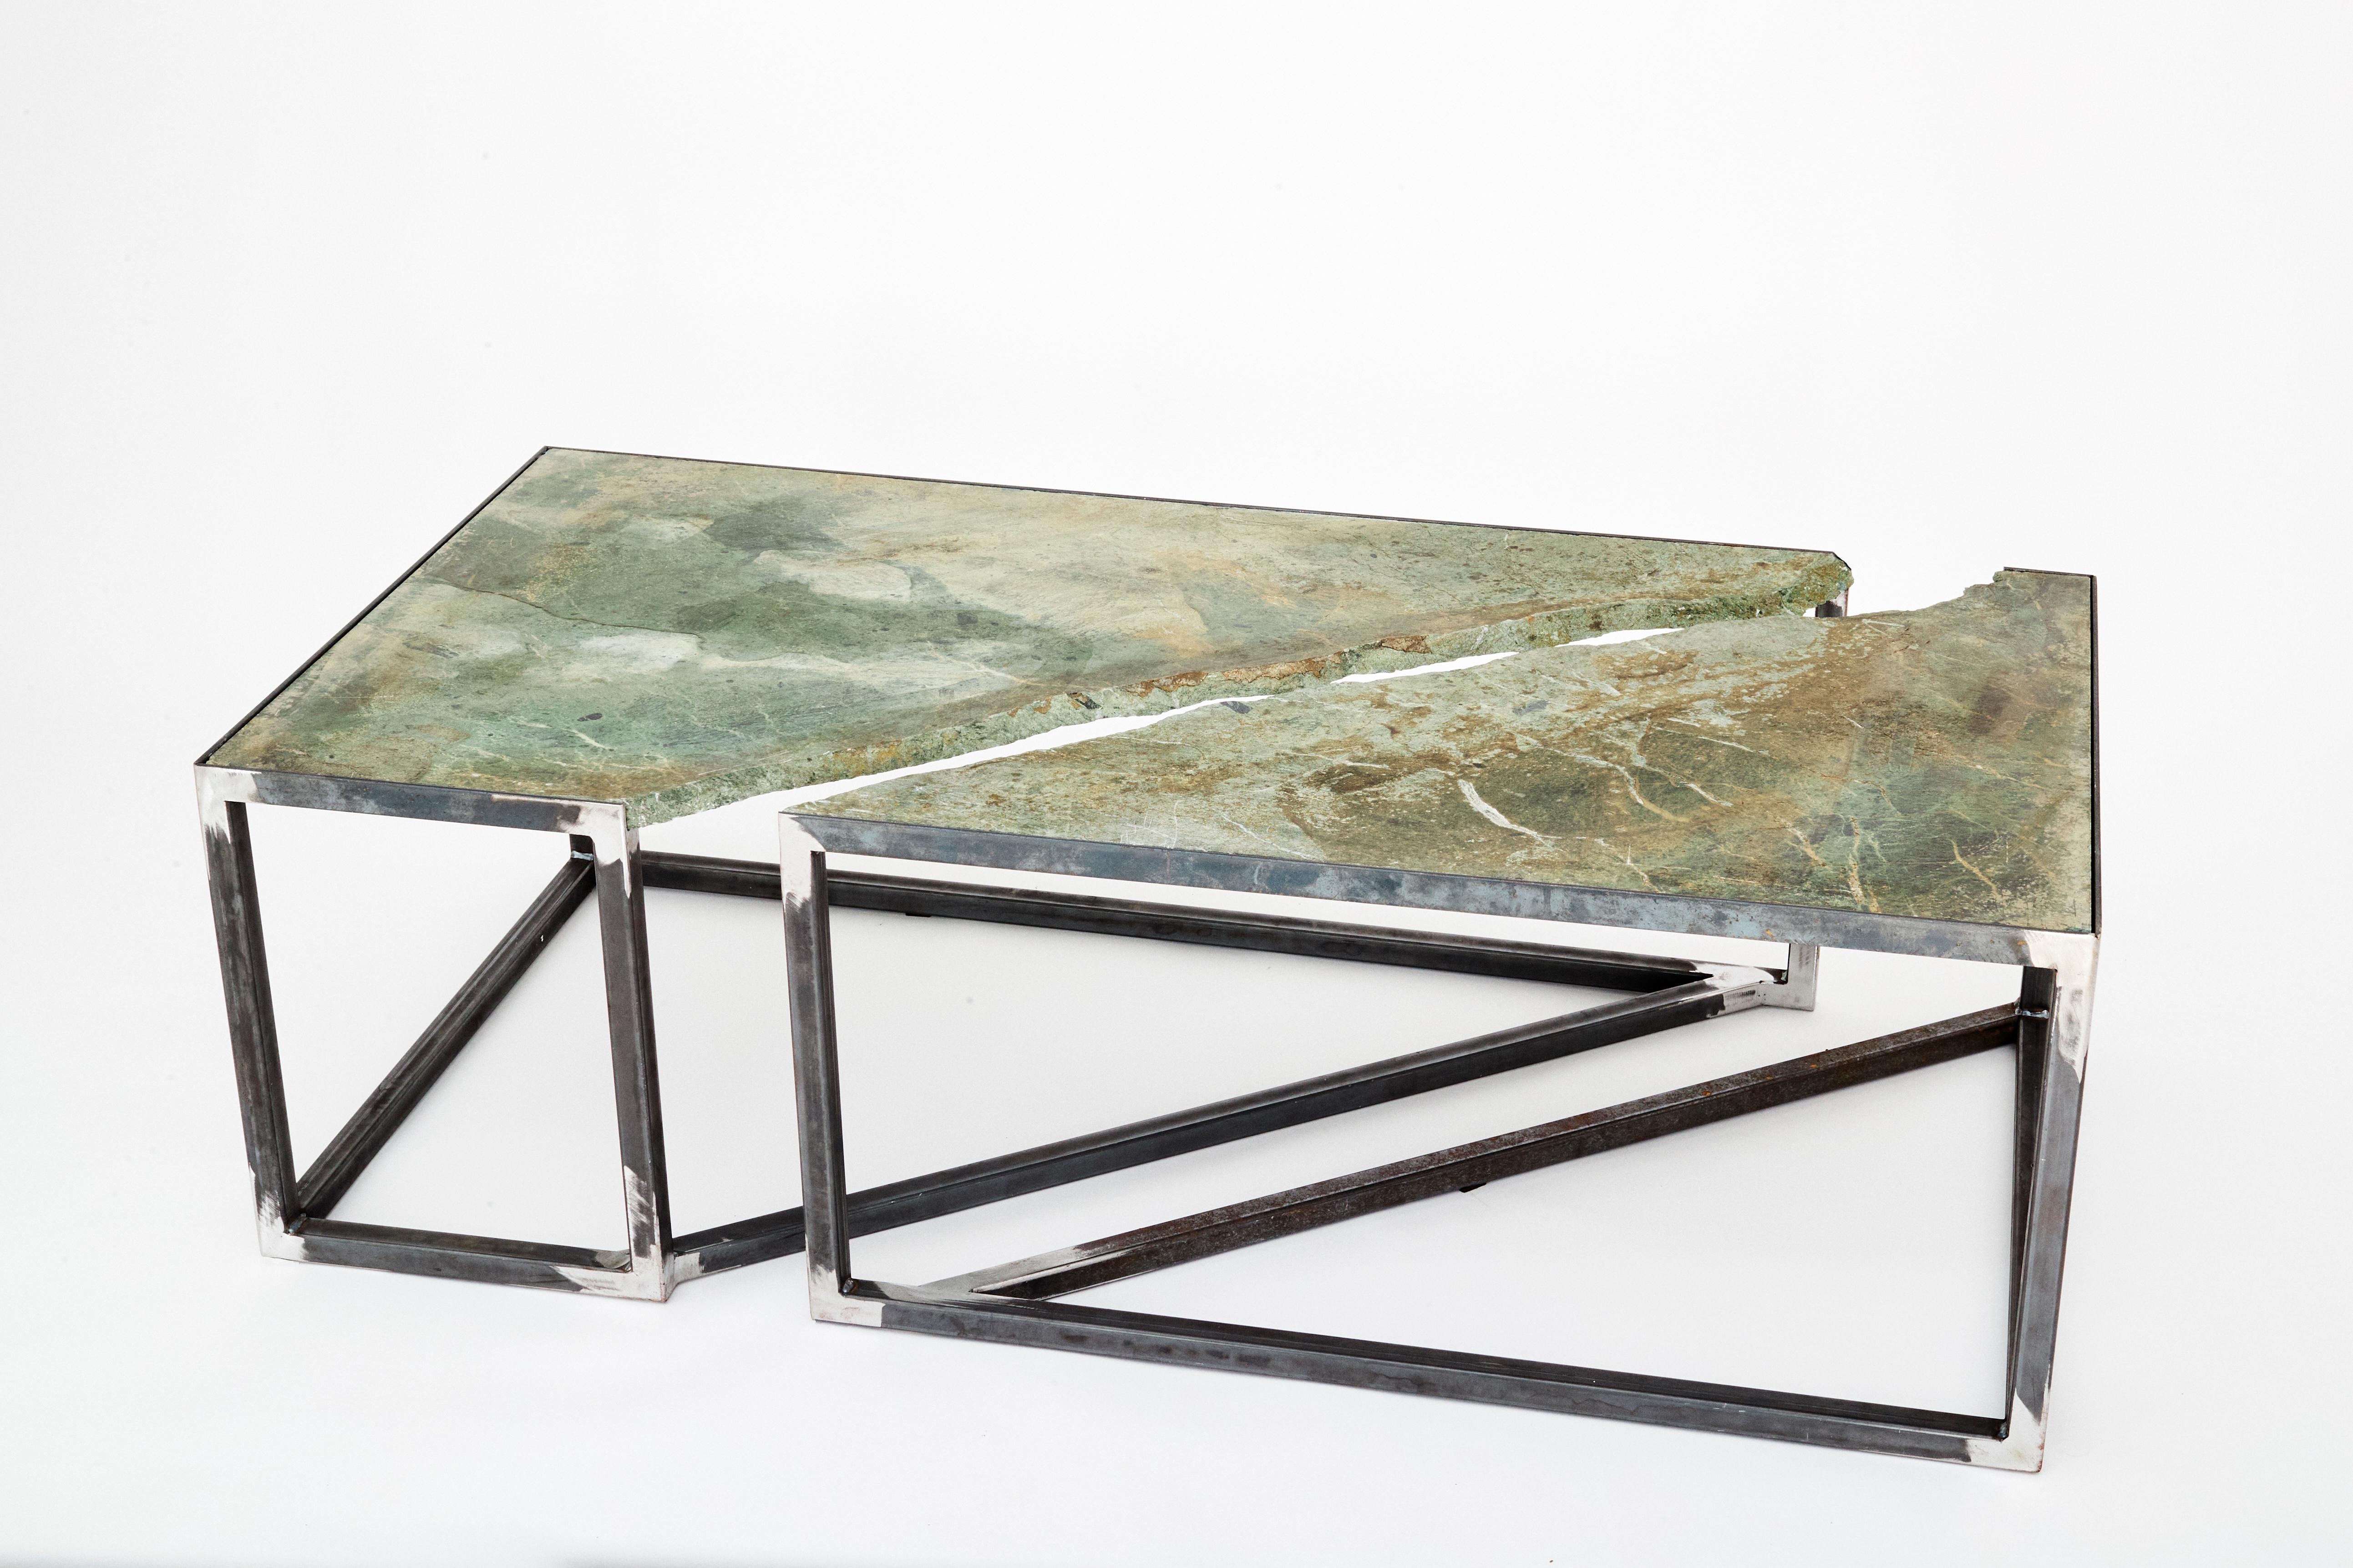 Fractus coffee table by Federico Fontanella
Dimensions: W 130 x D 62 x H 40 cm
Materials: brass, iron, marble

Federico Fontanella is the founder of Milan based design studio, Federico Fontanella Studio. He is constantly inspired by his curiosity